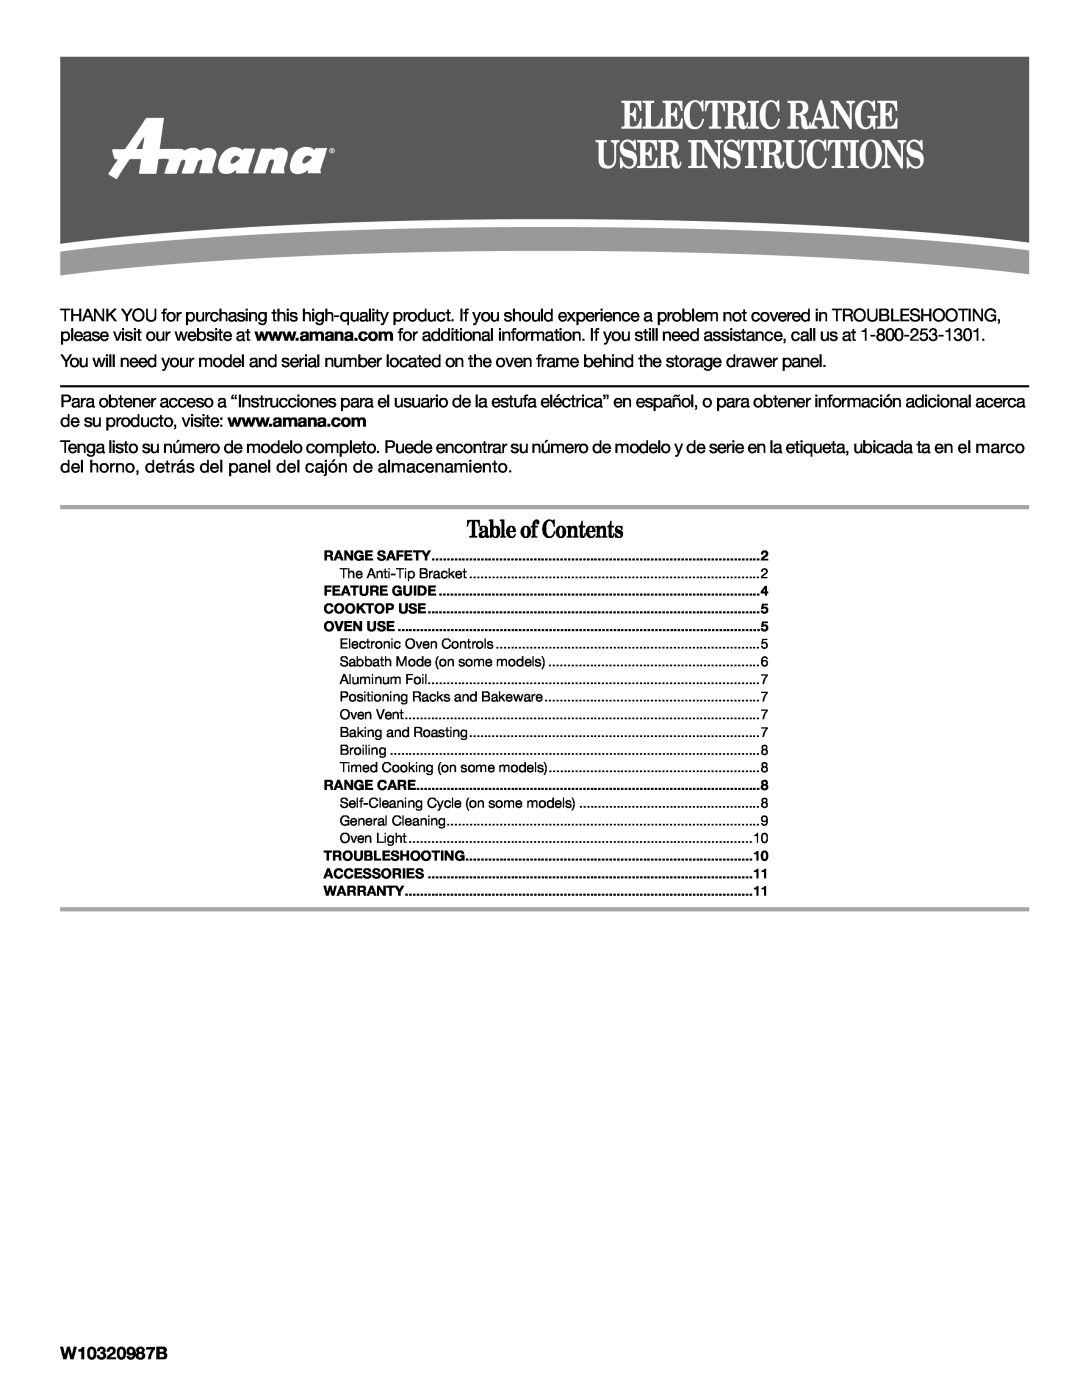 Amana W103209878 warranty W10320987B, Electric Range User Instructions, Table of Contents 